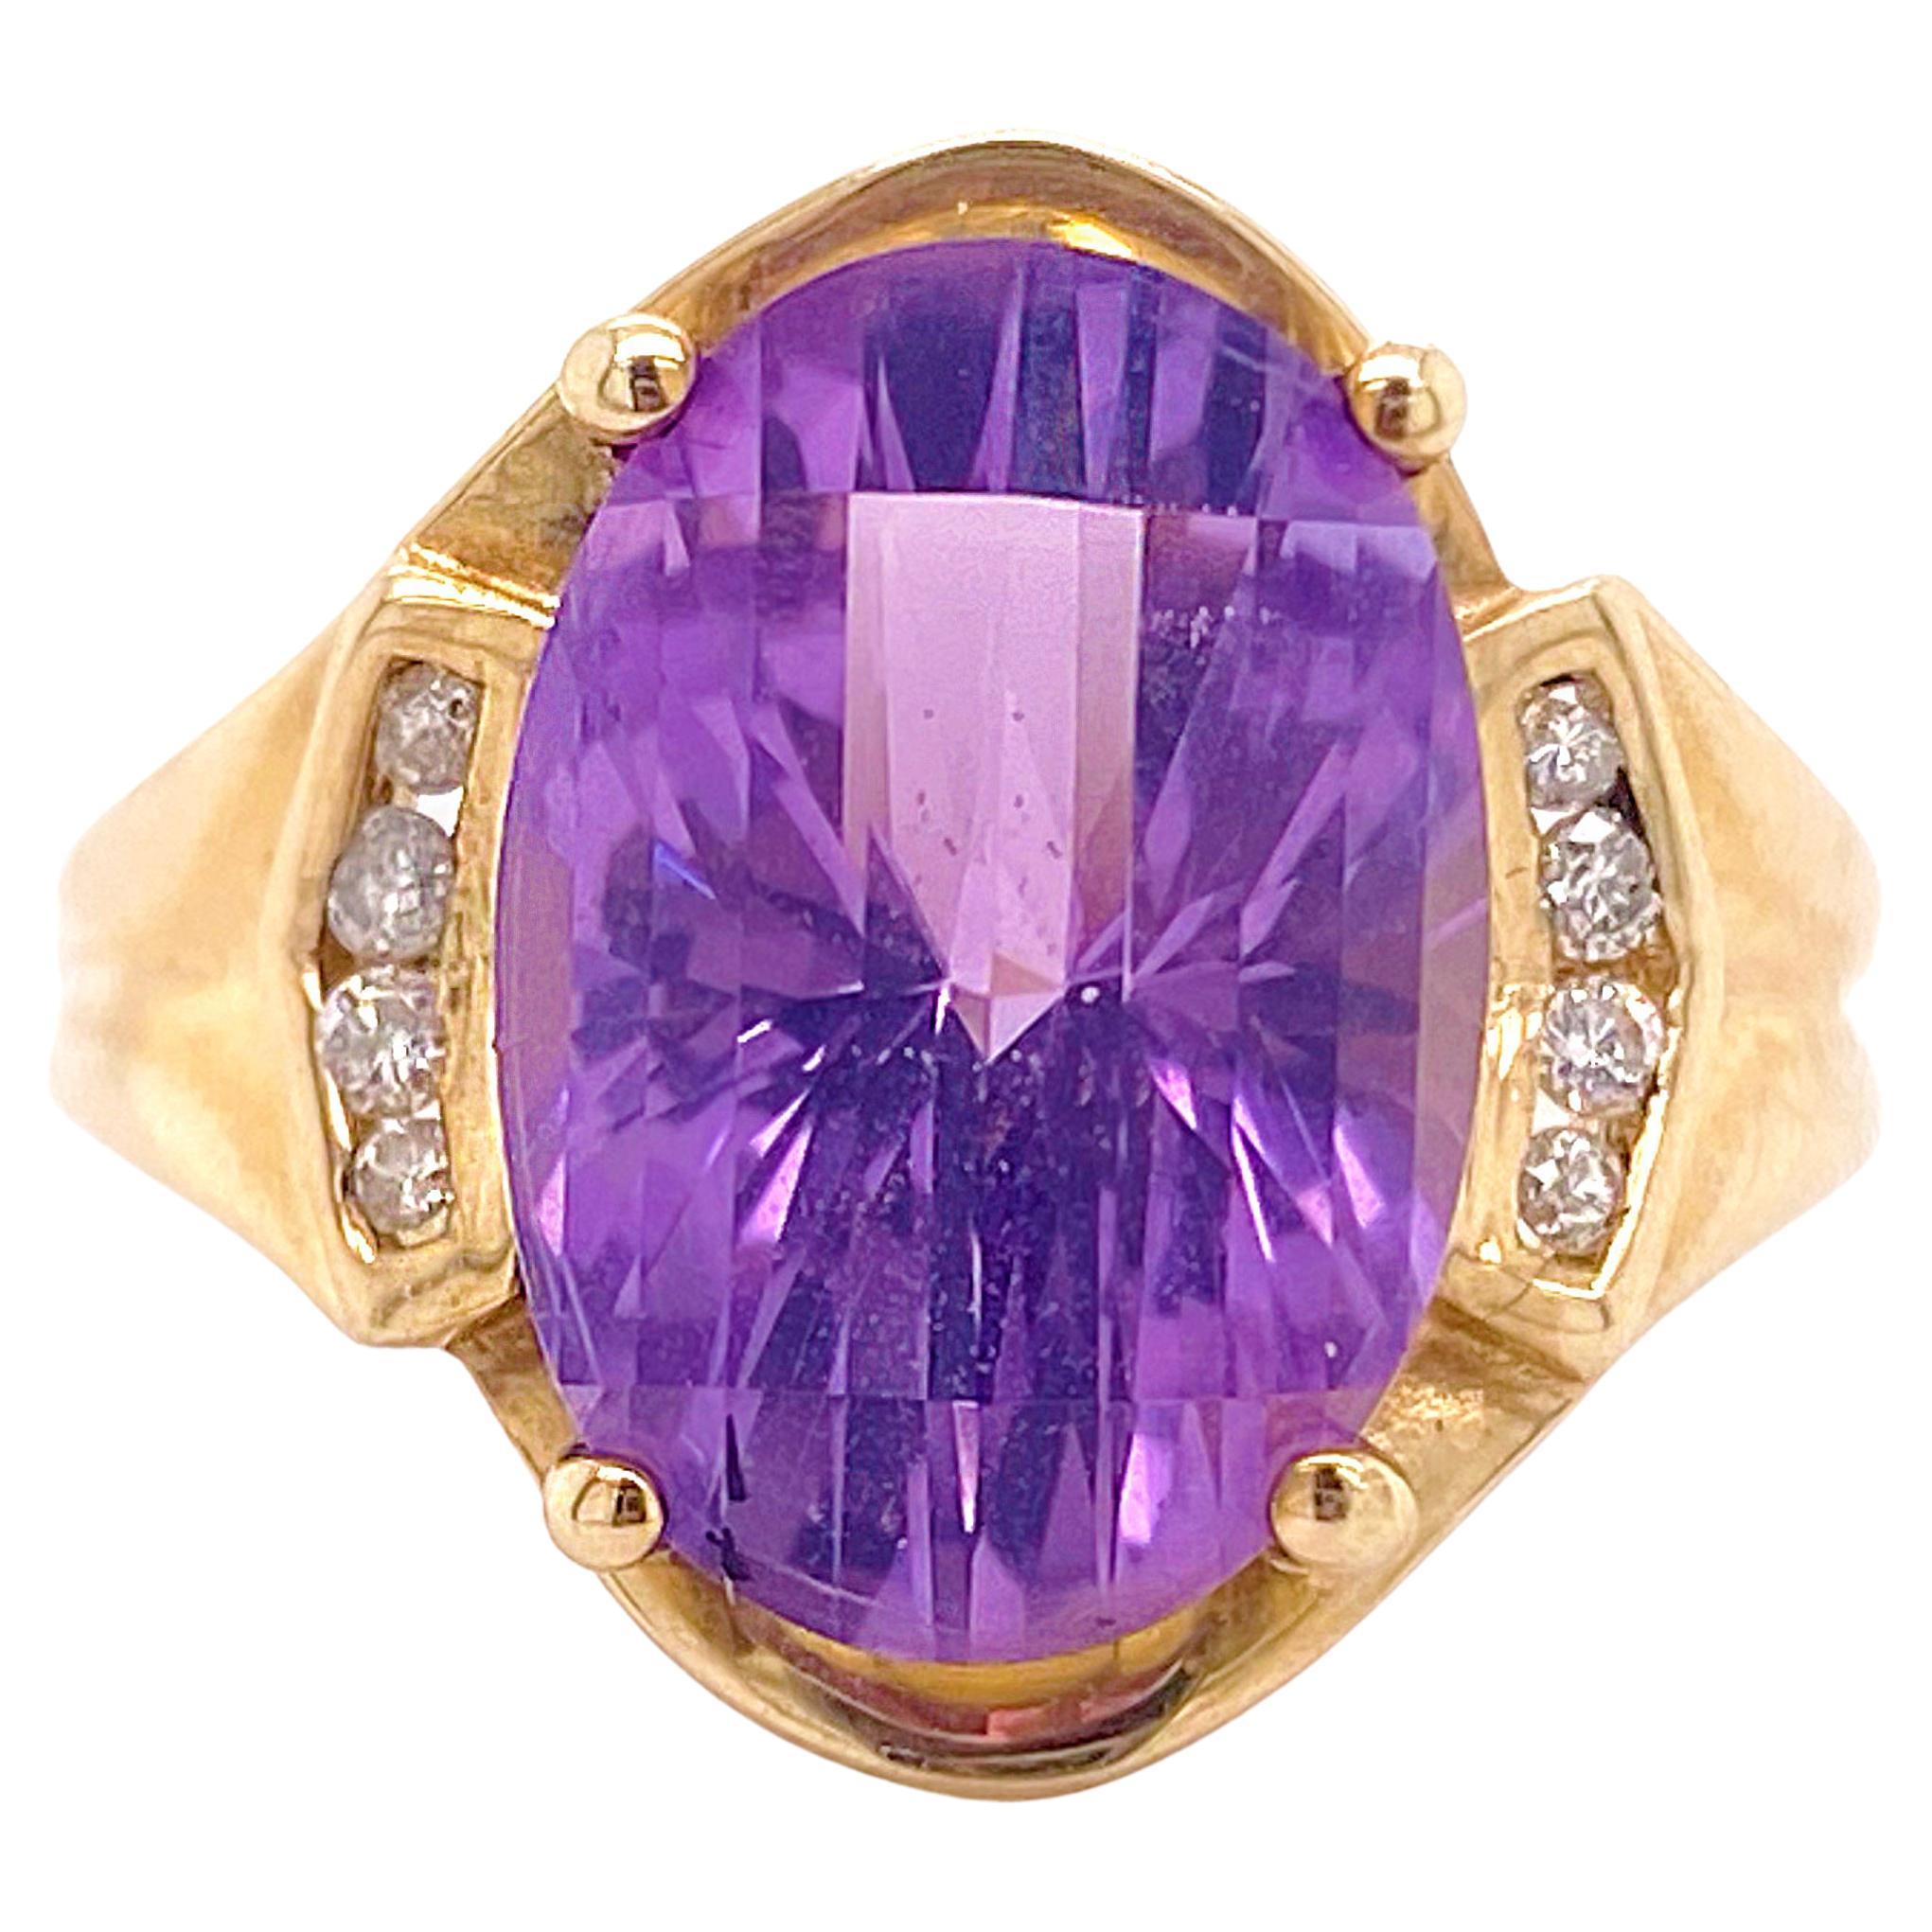 Diamond Amethyst Ring, Yellow Gold, Estate Ring With Genuine 6.0 Carat Amethyst For Sale